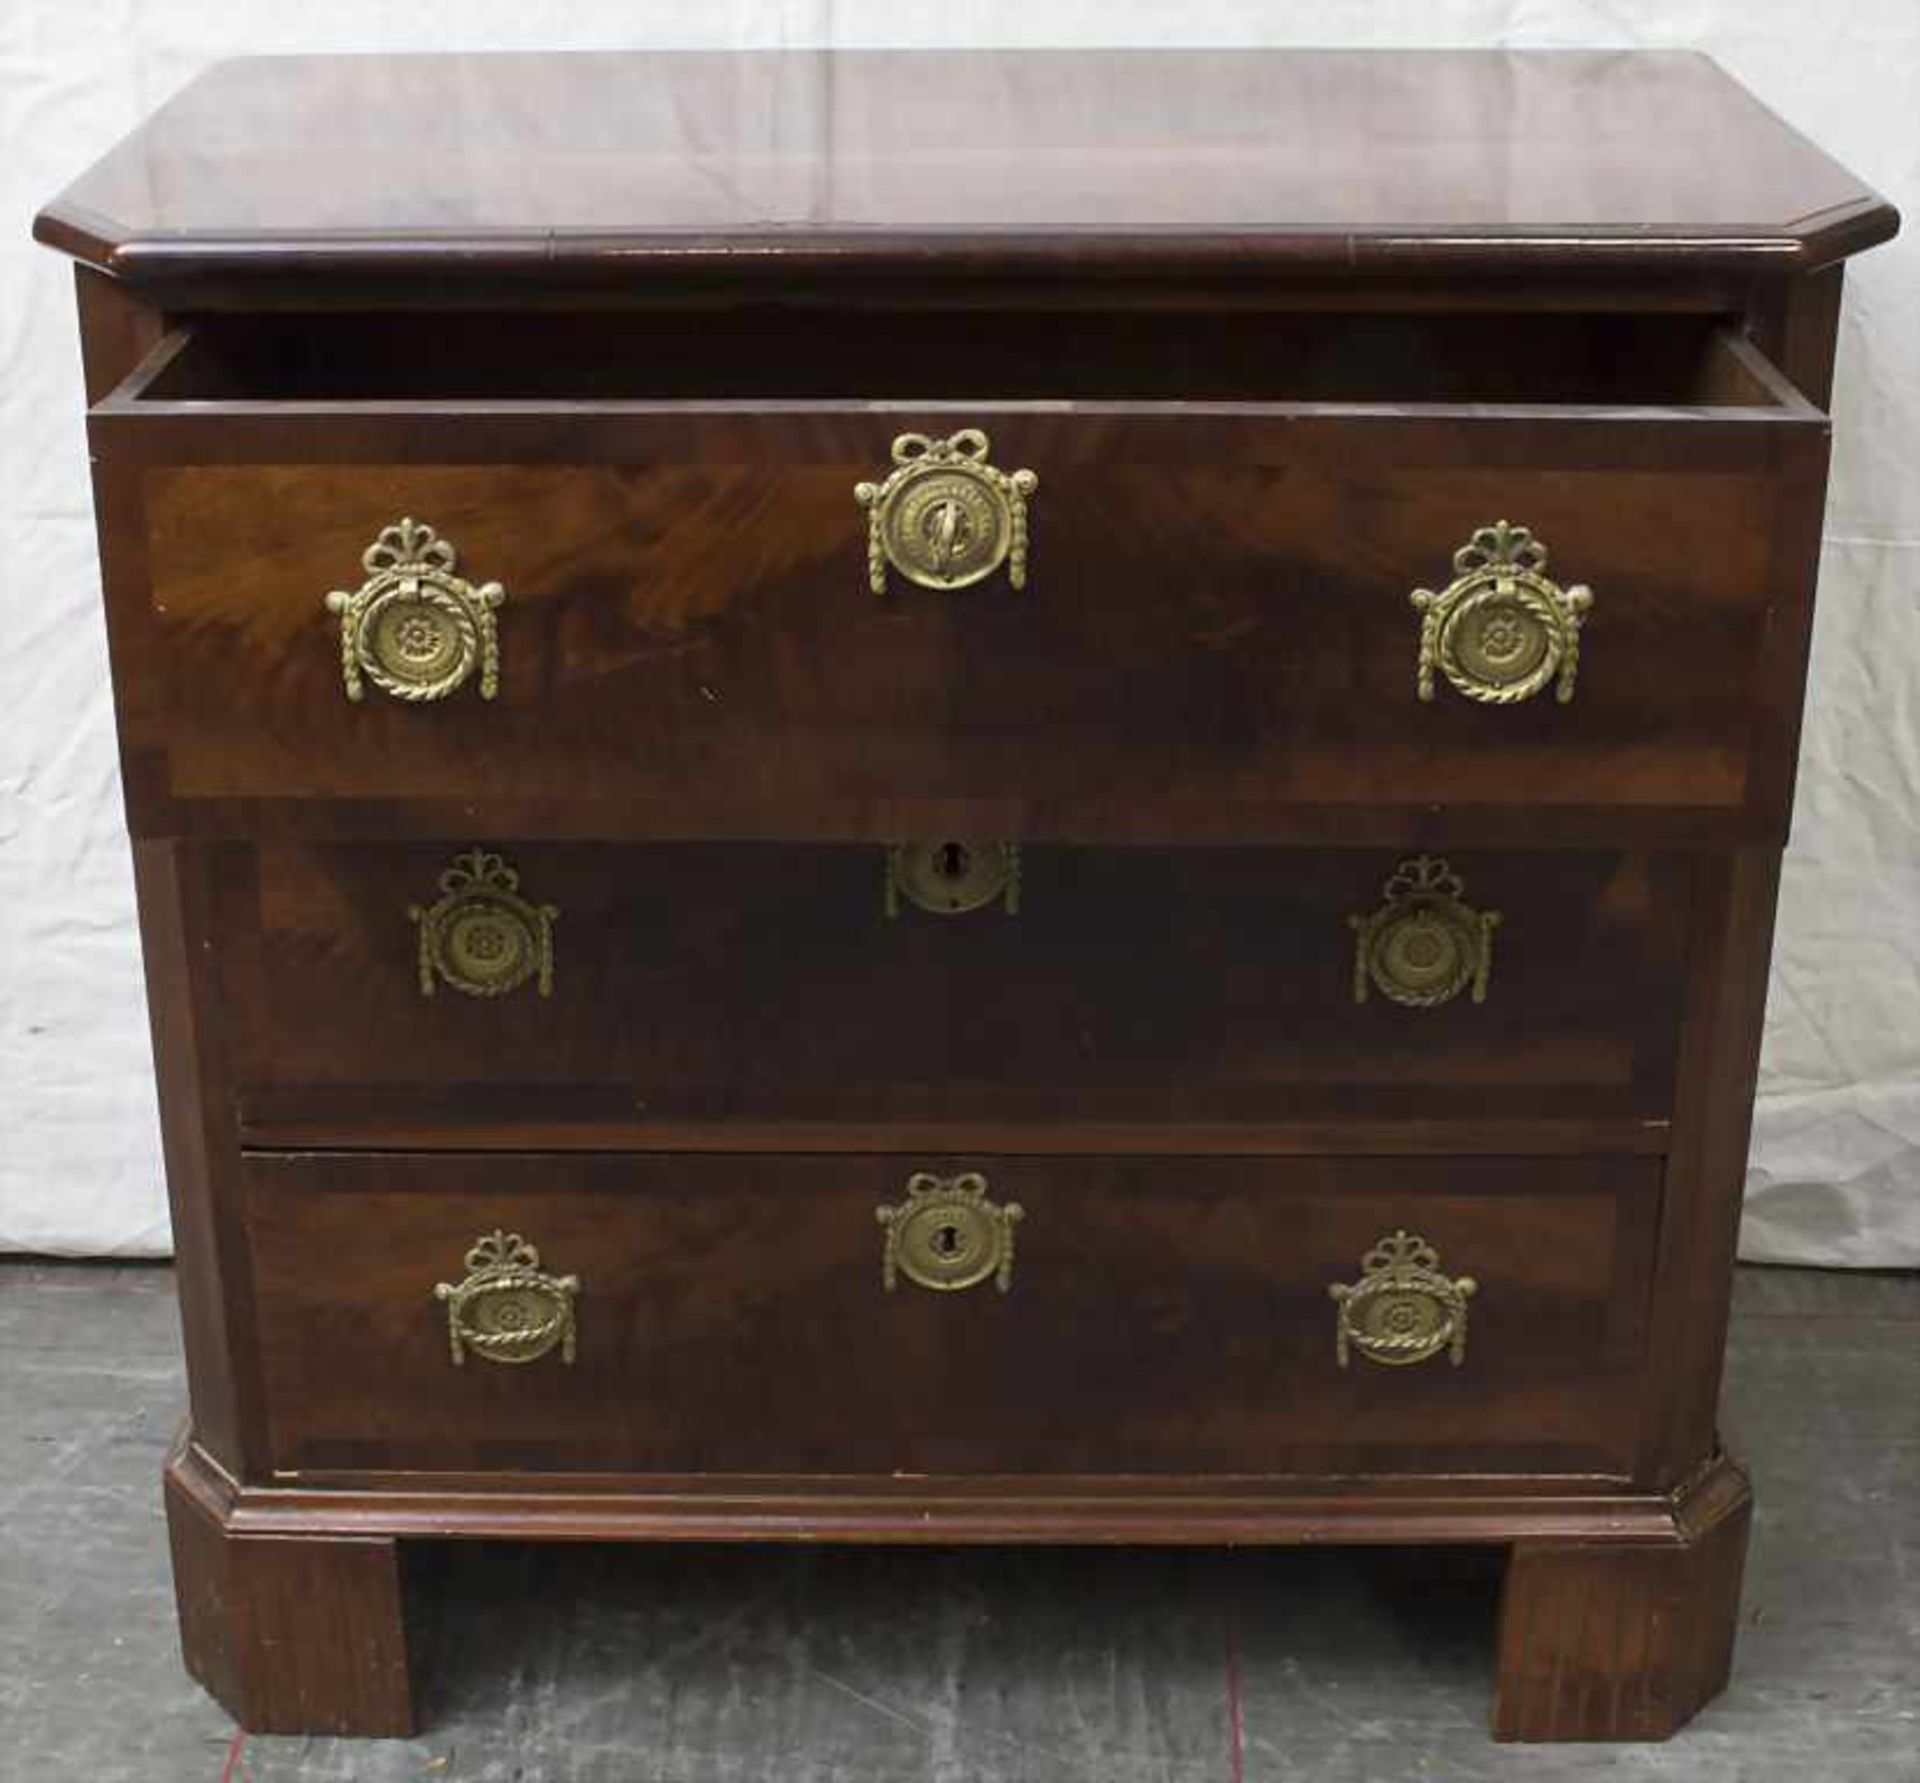 Kommode / A chest of drawers, 19. Jh.Material: Mahagoni, furniert, Messingbeschläge, Maße: H. 76 cm, - Image 2 of 2